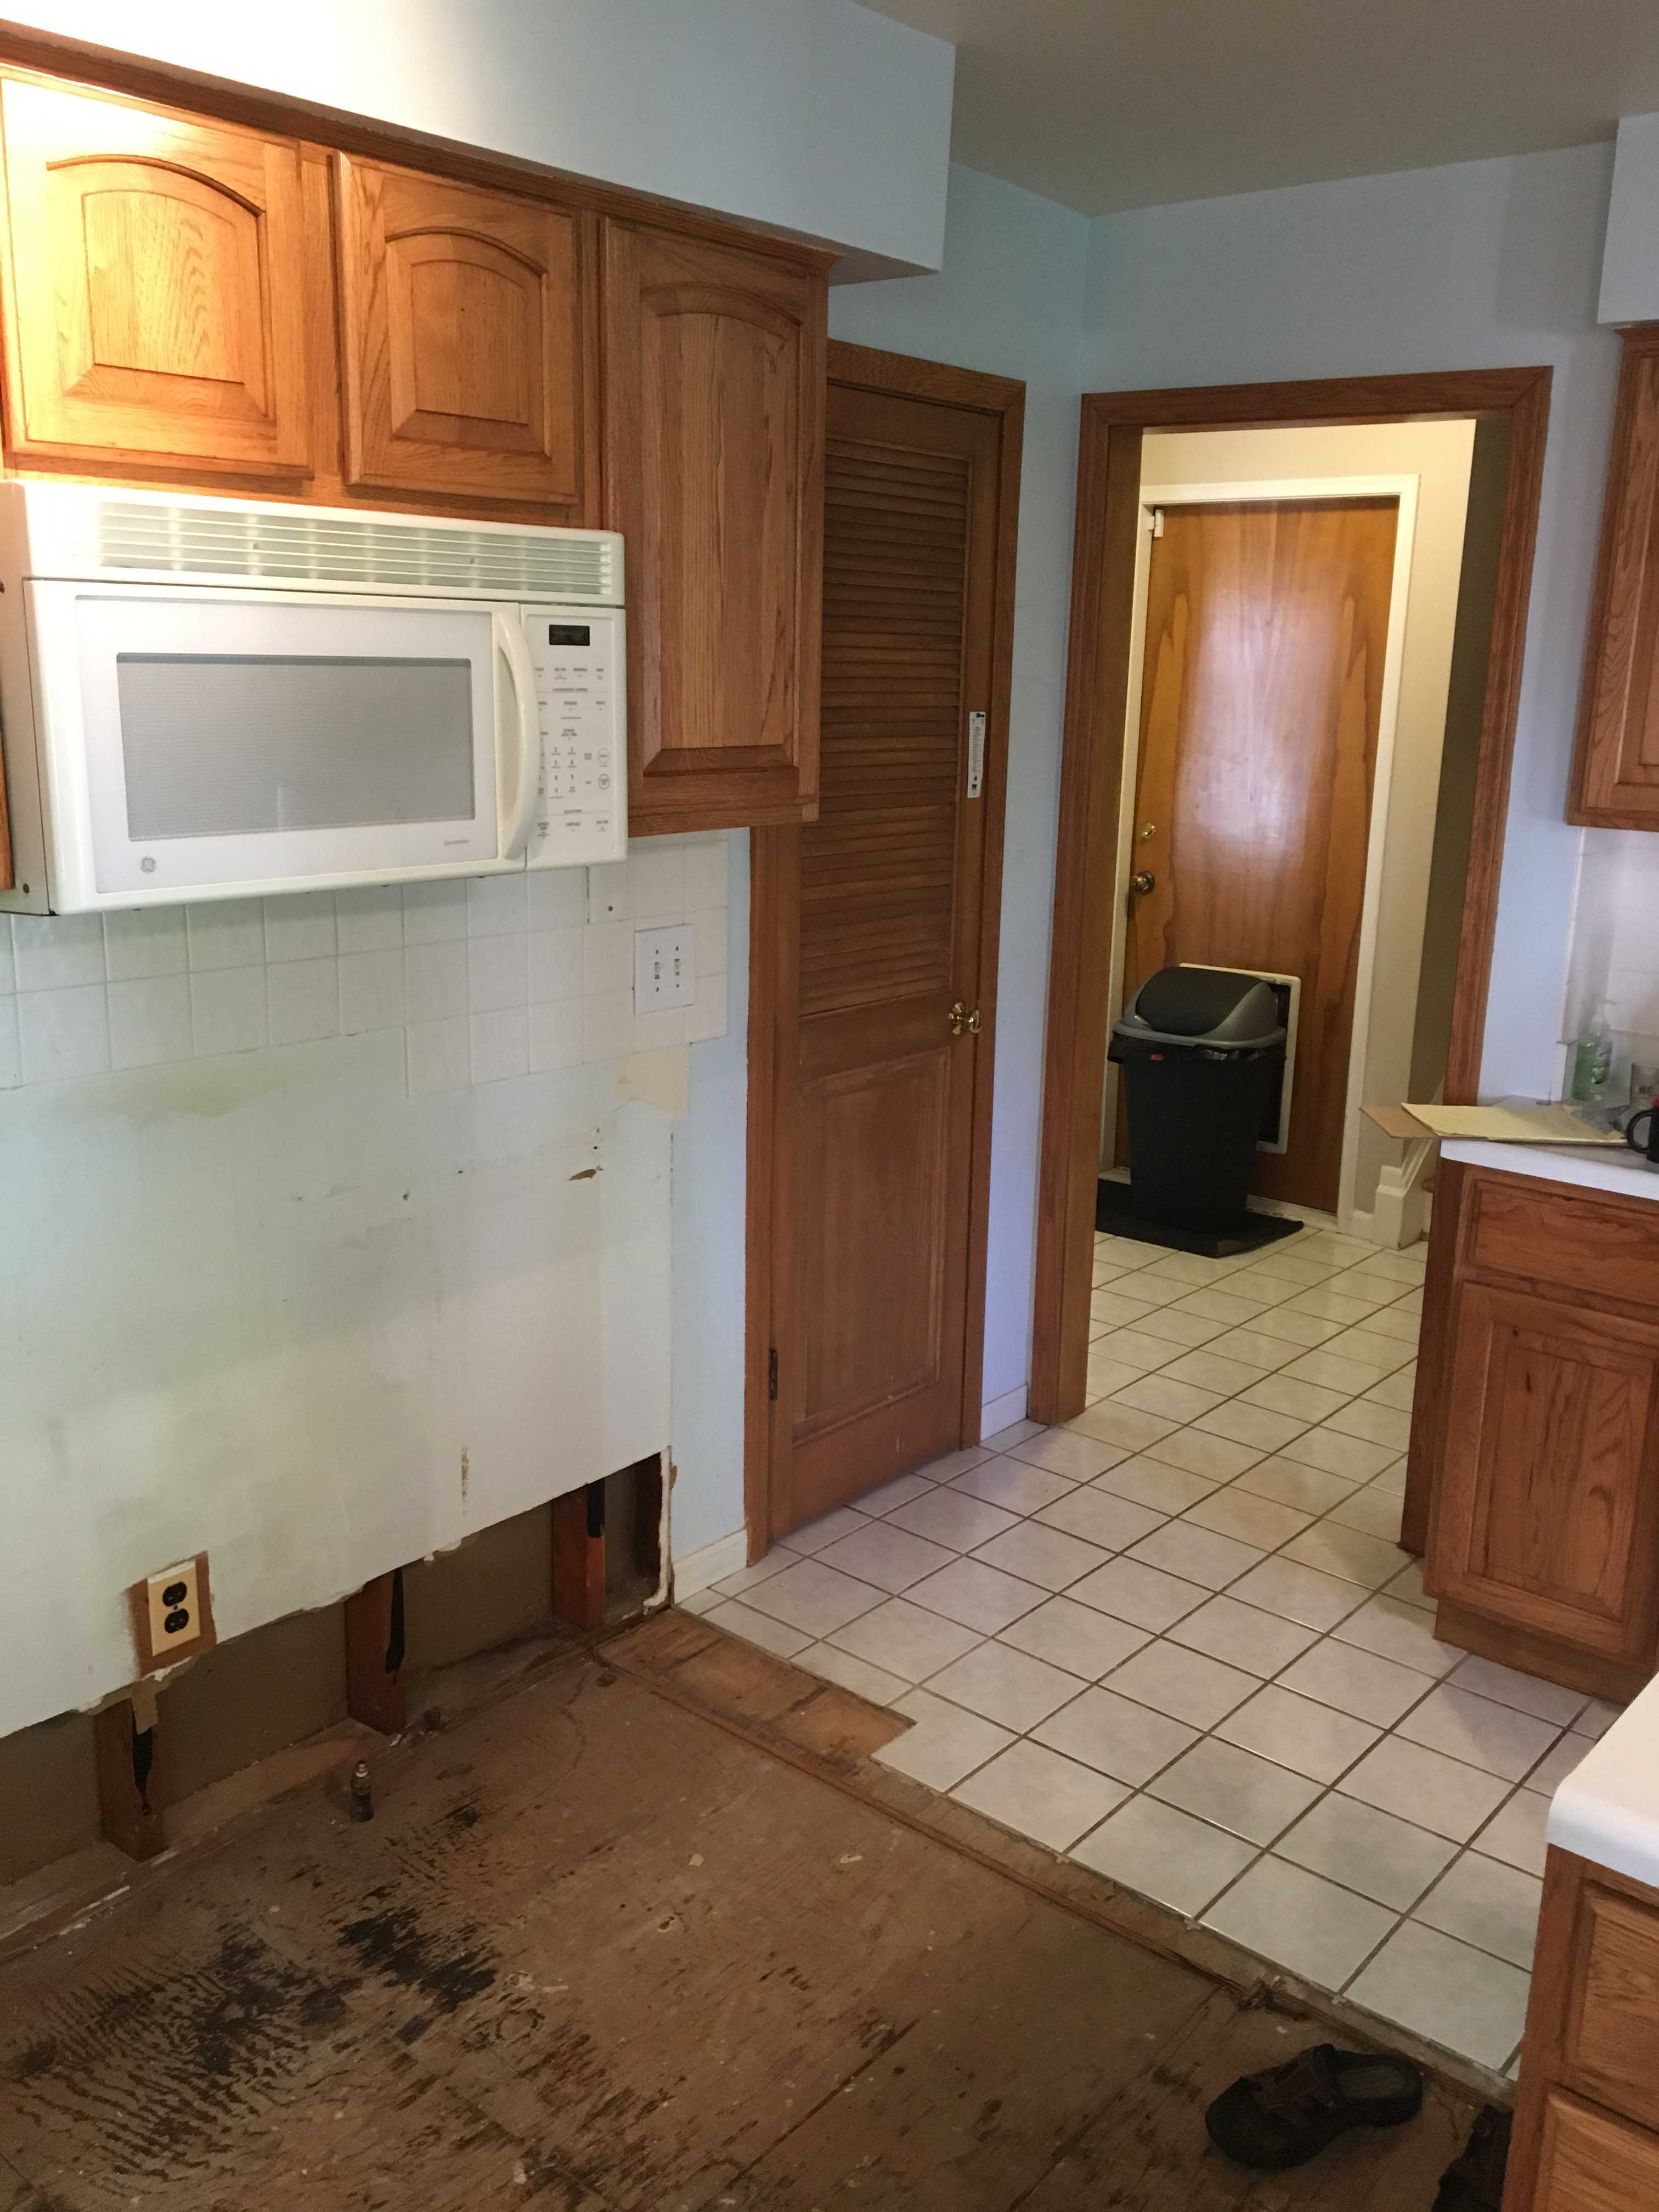 black mold in kitchen wood floor after water damage in Ann Arbor